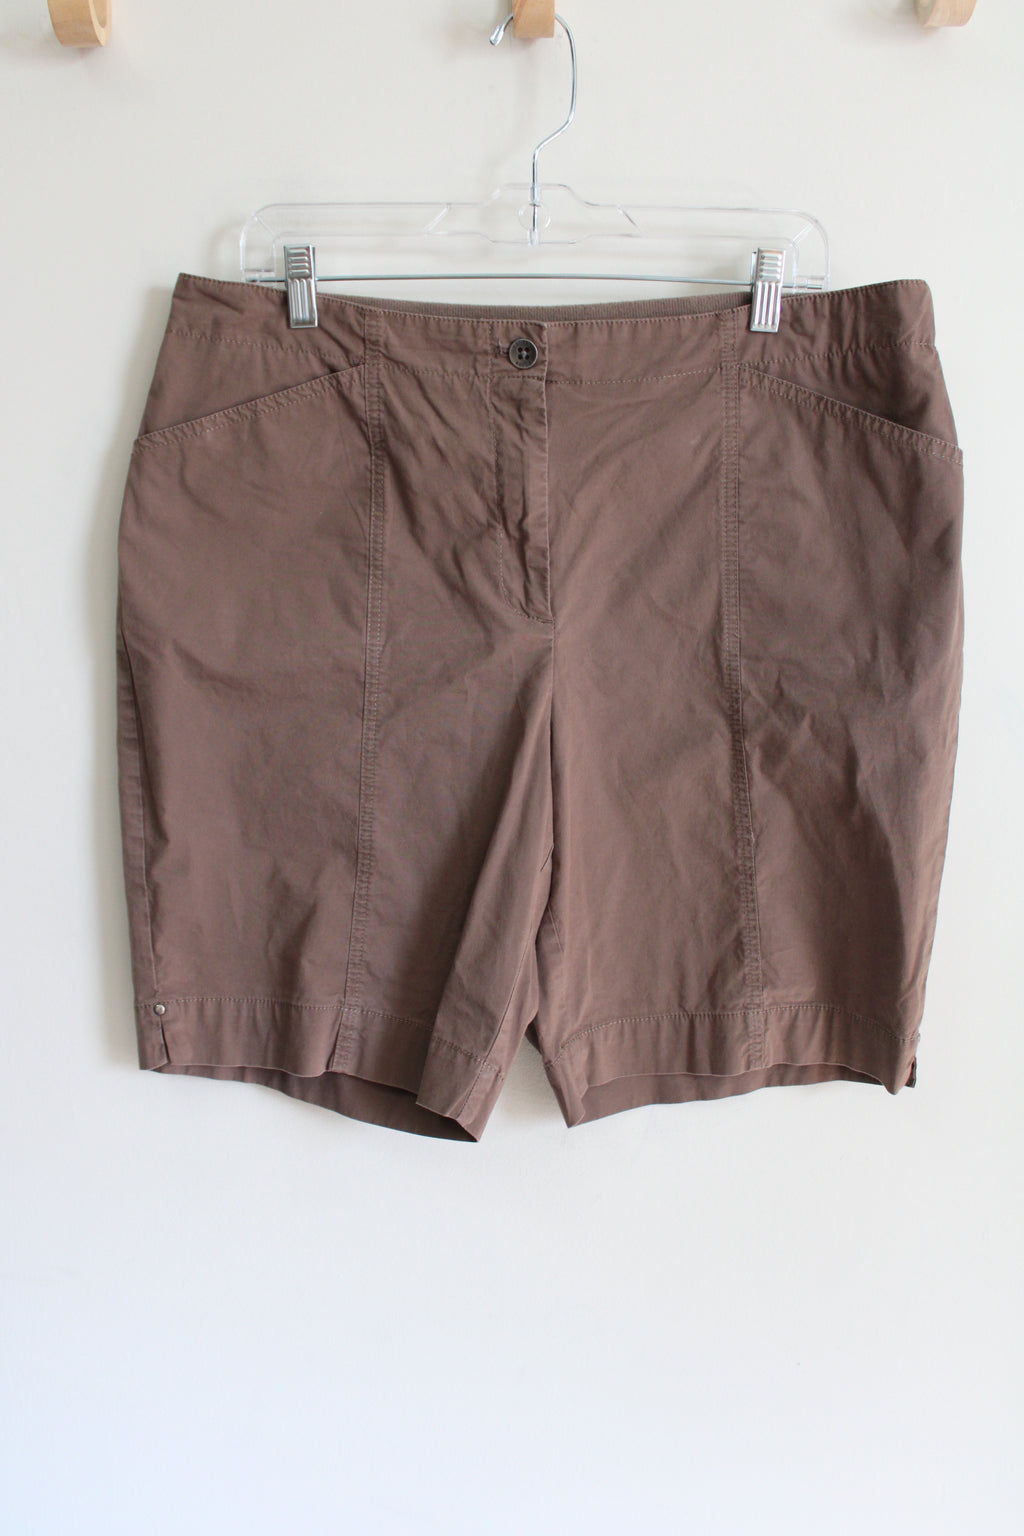 Chico's Brown Shorts | 2.5 (L/14)